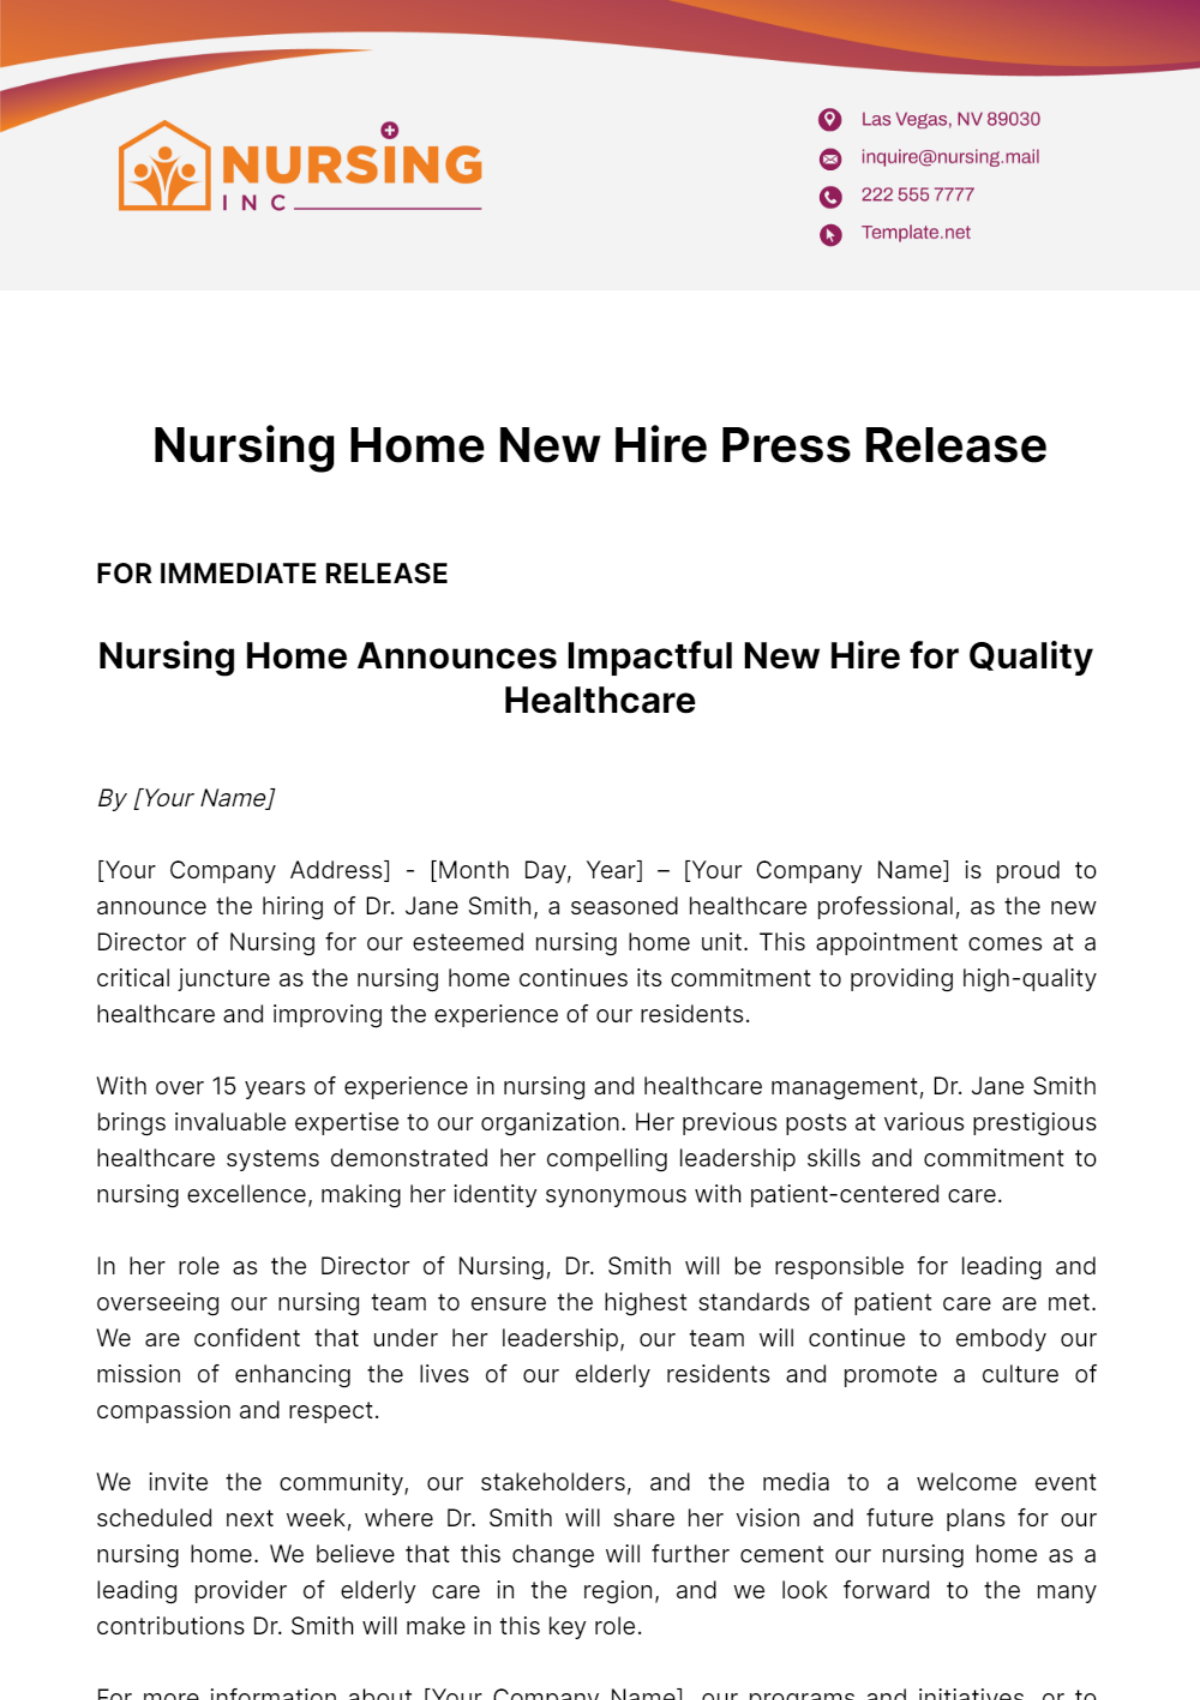 Nursing Home New Hire Press Release Template